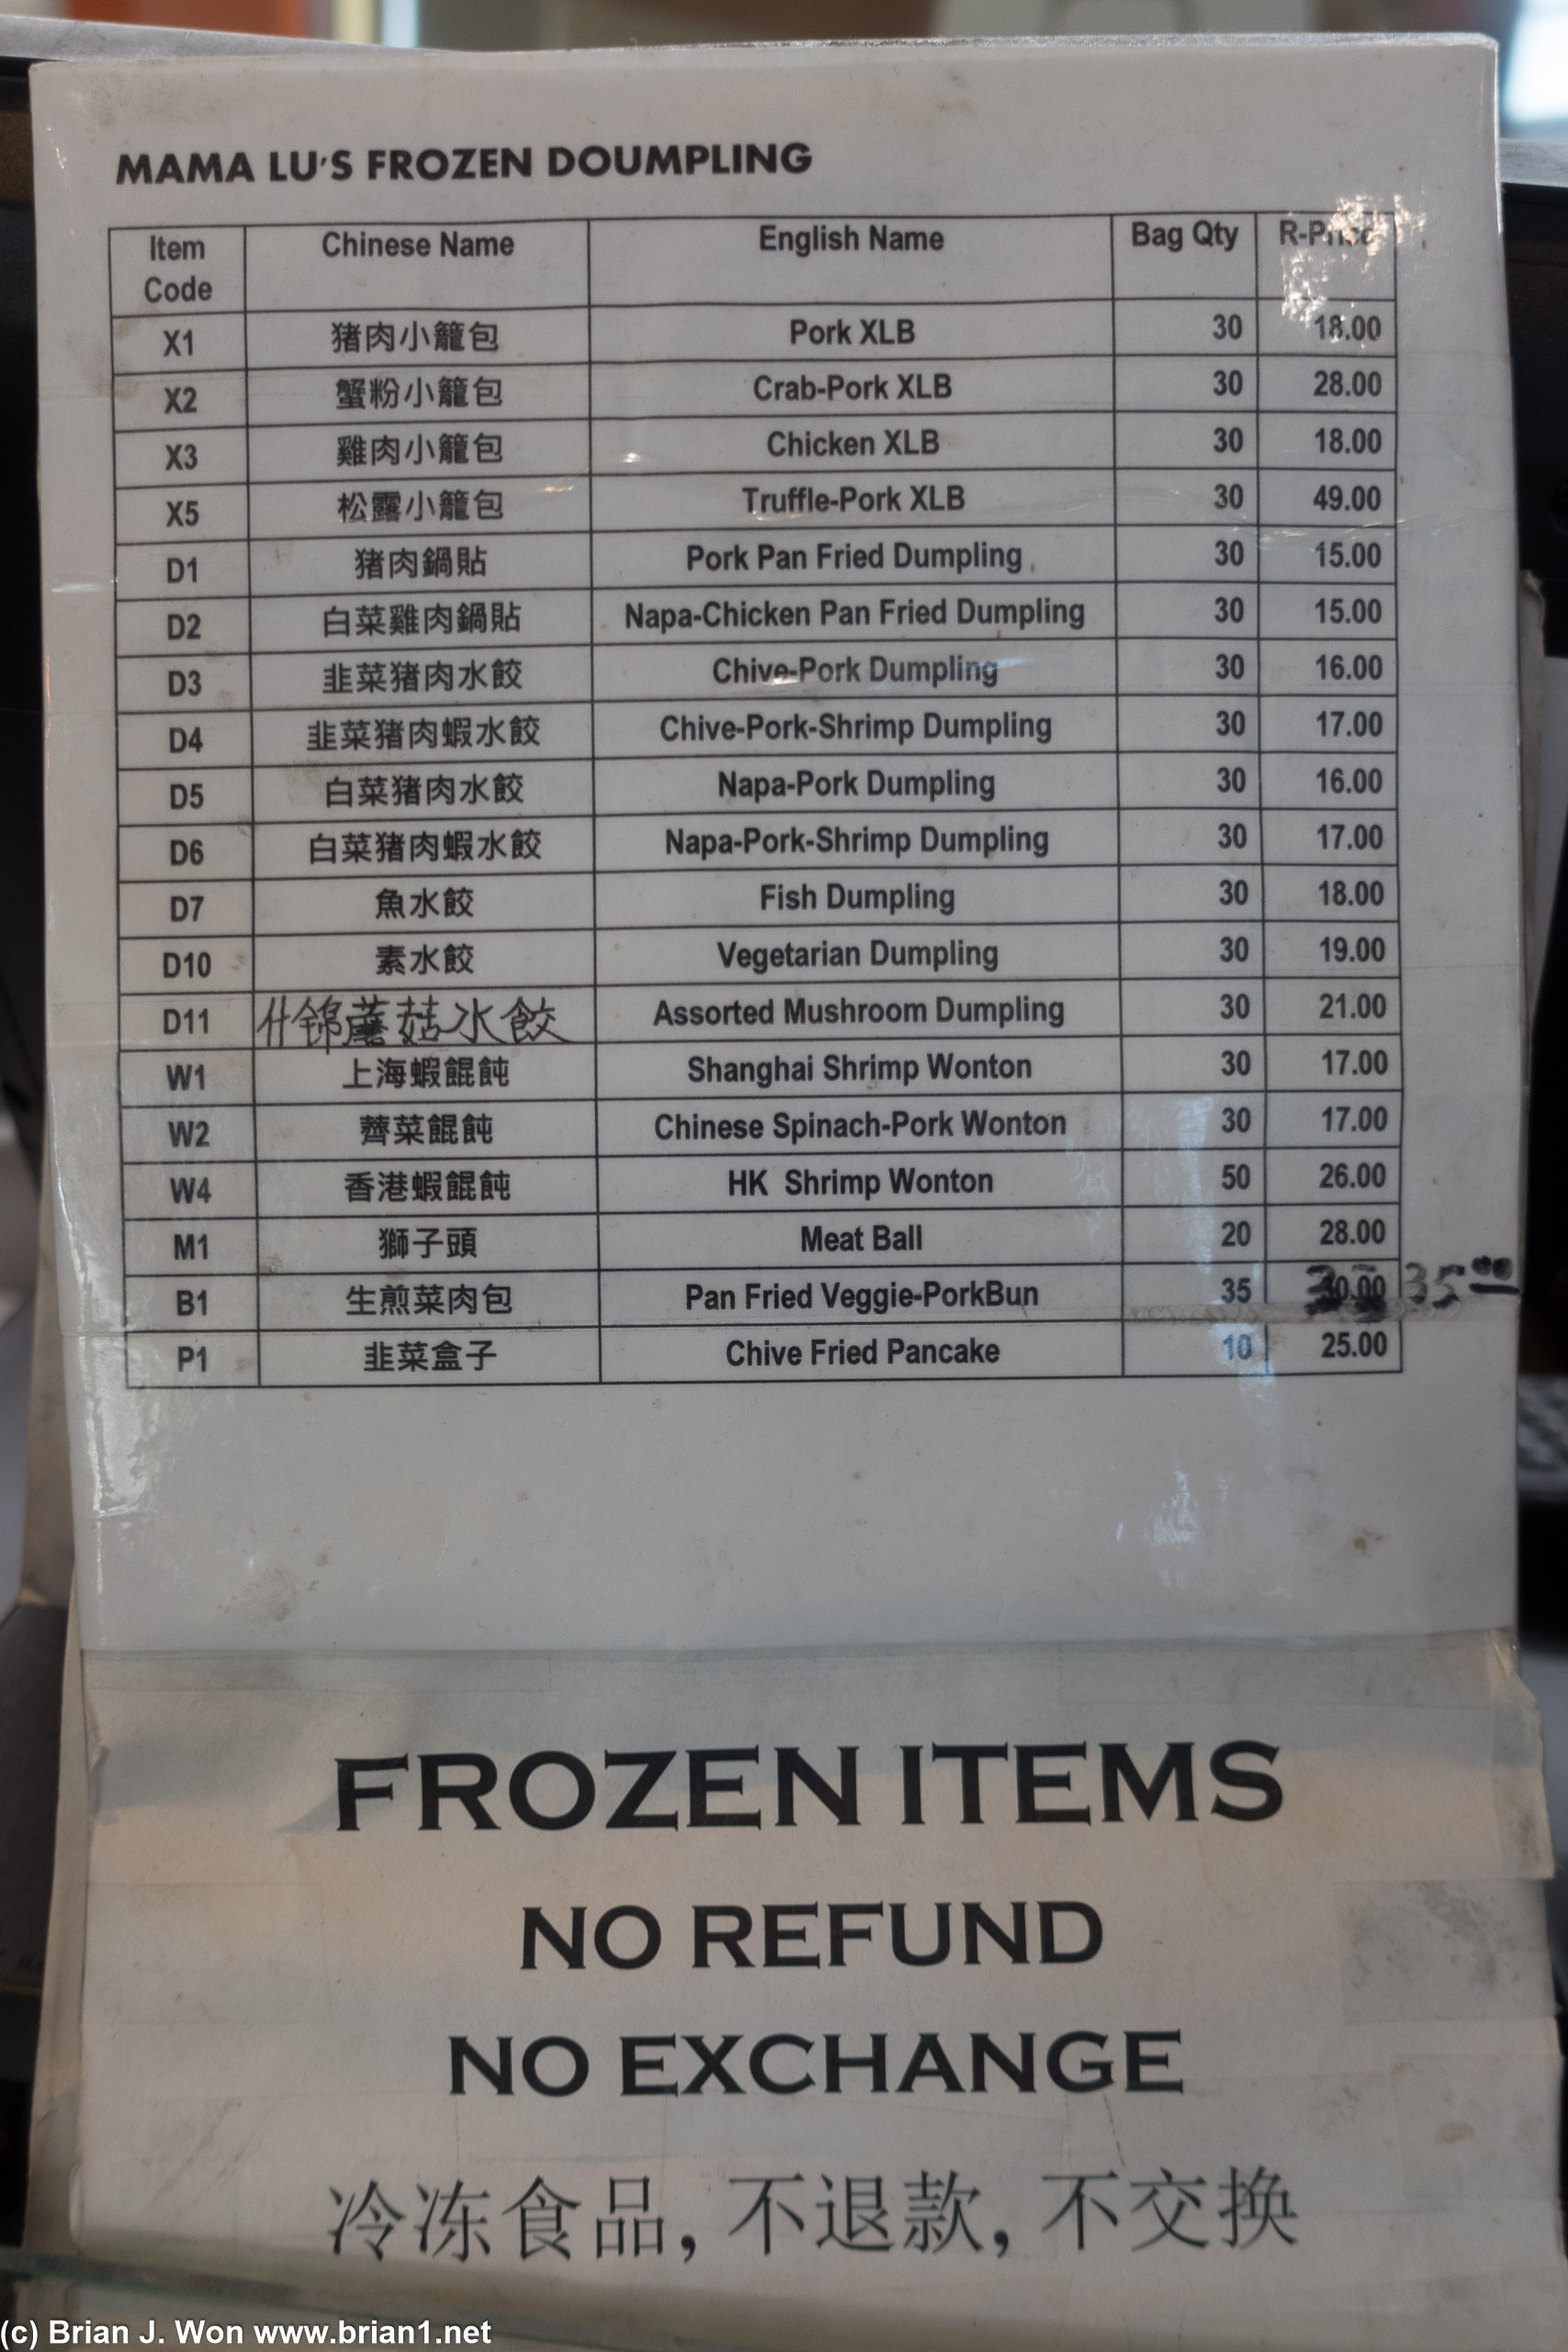 Prices on frozen dumplings at Mama's Lu have gone up. Used to be start about $0.40/dumpling, now it starts at $0.50/dumpling and the bags are smaller.